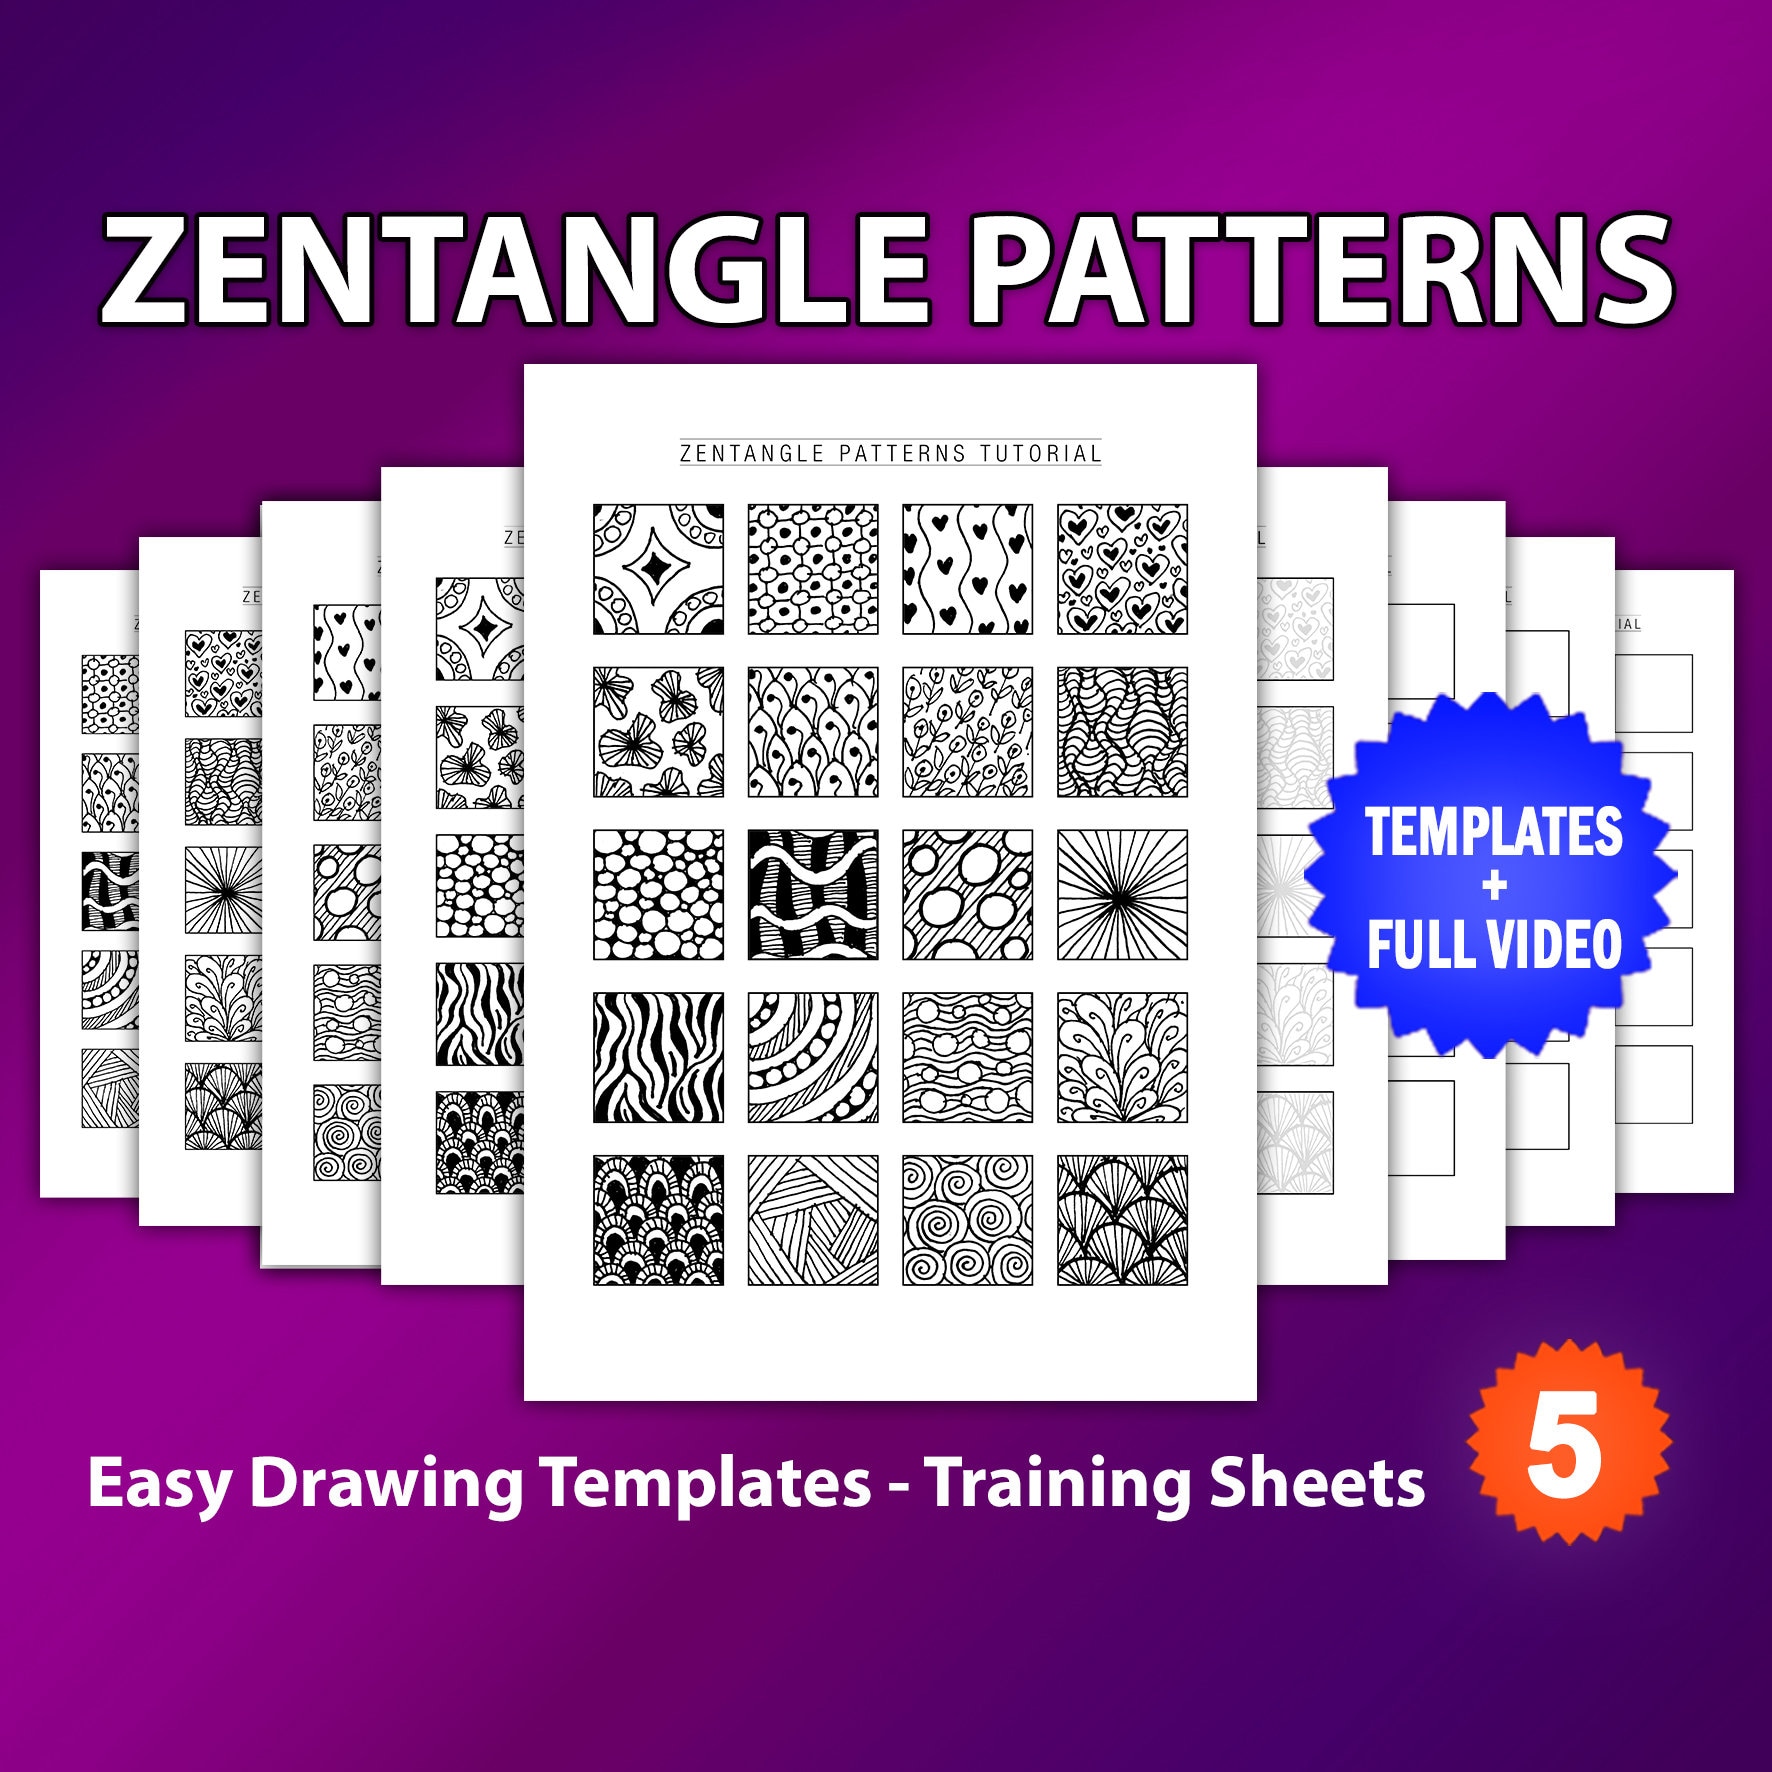 Zen Tangle Pattern Book: The Answer to Where Can You Get Adult Coloring  Books For Women And Men - Stress Relieving Coloring Book Educative Love Art  Therapy by Black Stars Press